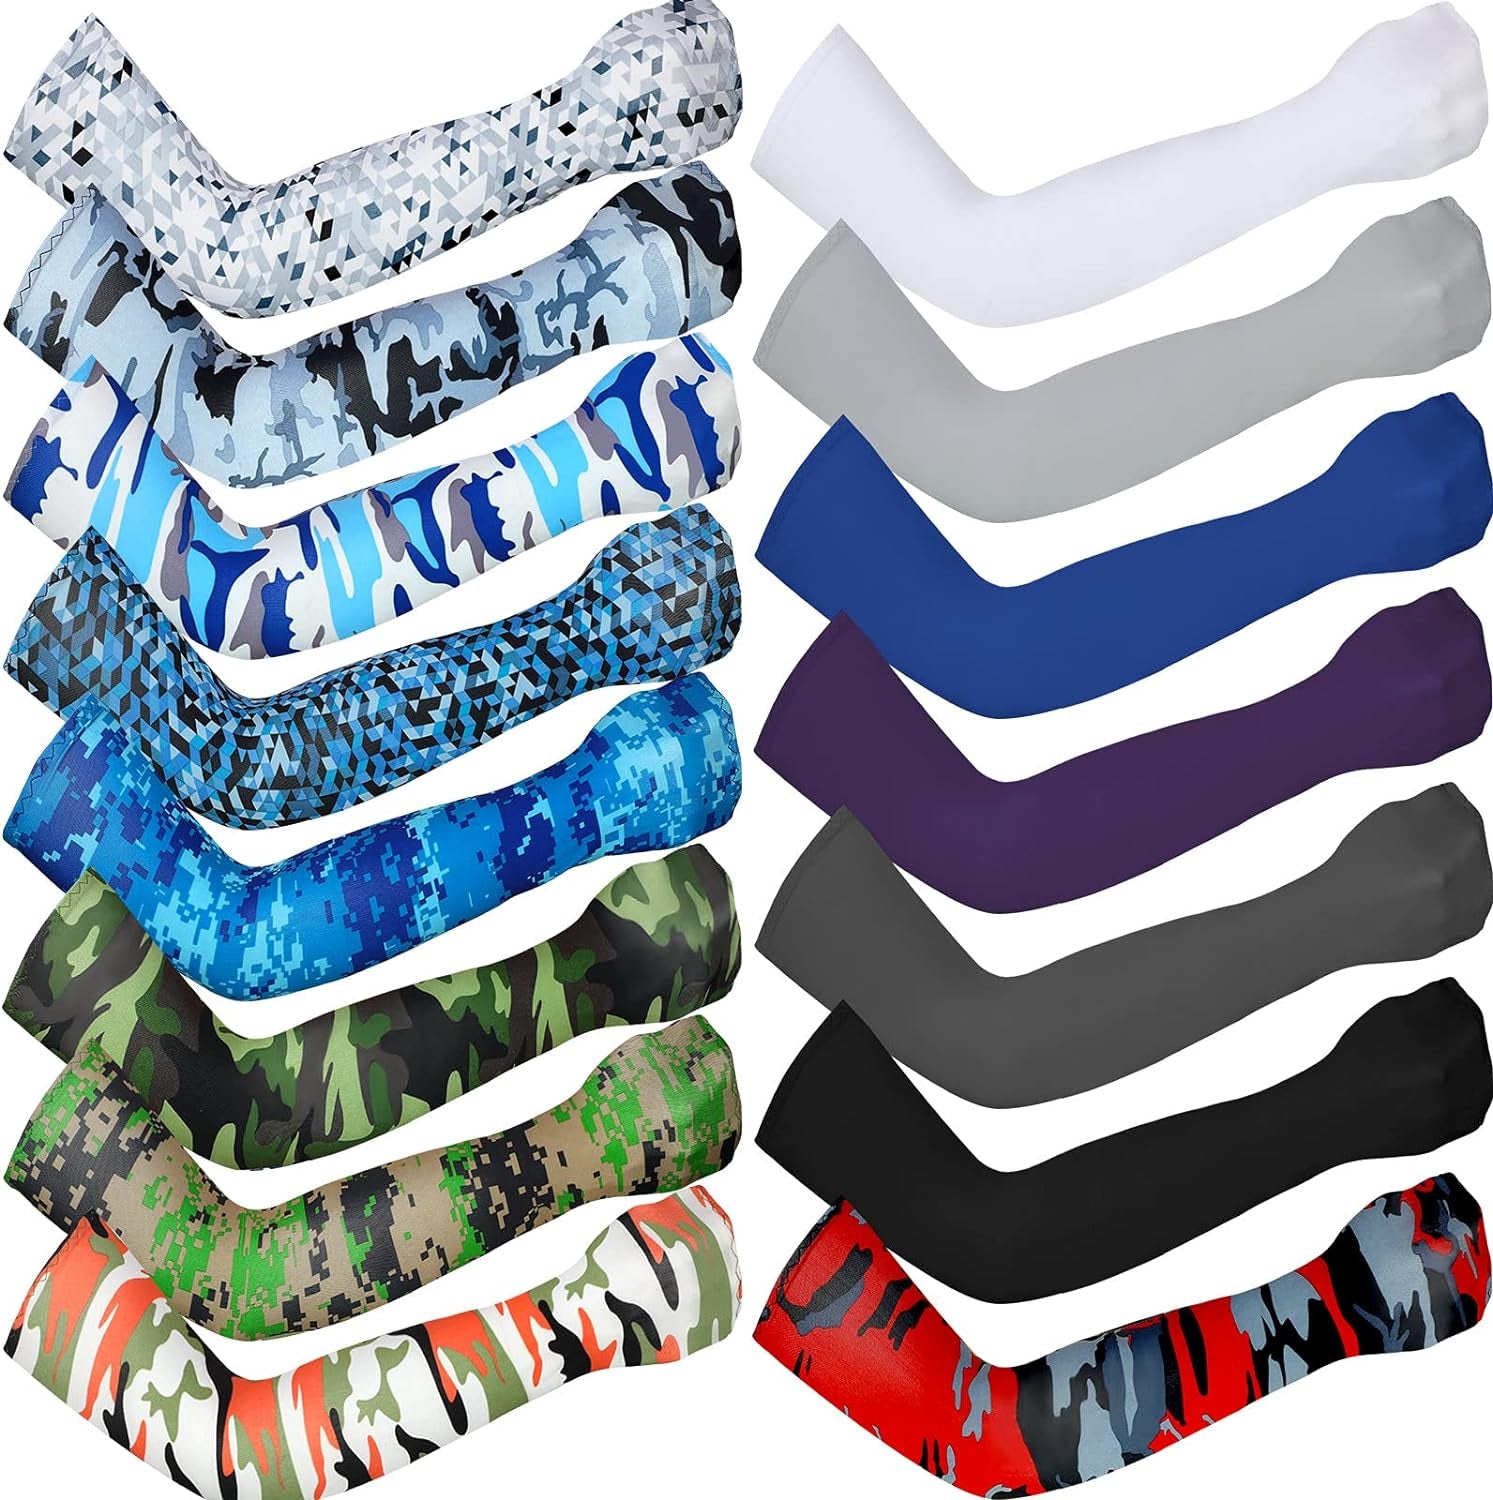 15 Pairs Unisex Arm Sleeves UV Protection Arm Covers Cooling Protective Arm Sleeves for Running Cycling Driving Outdoor